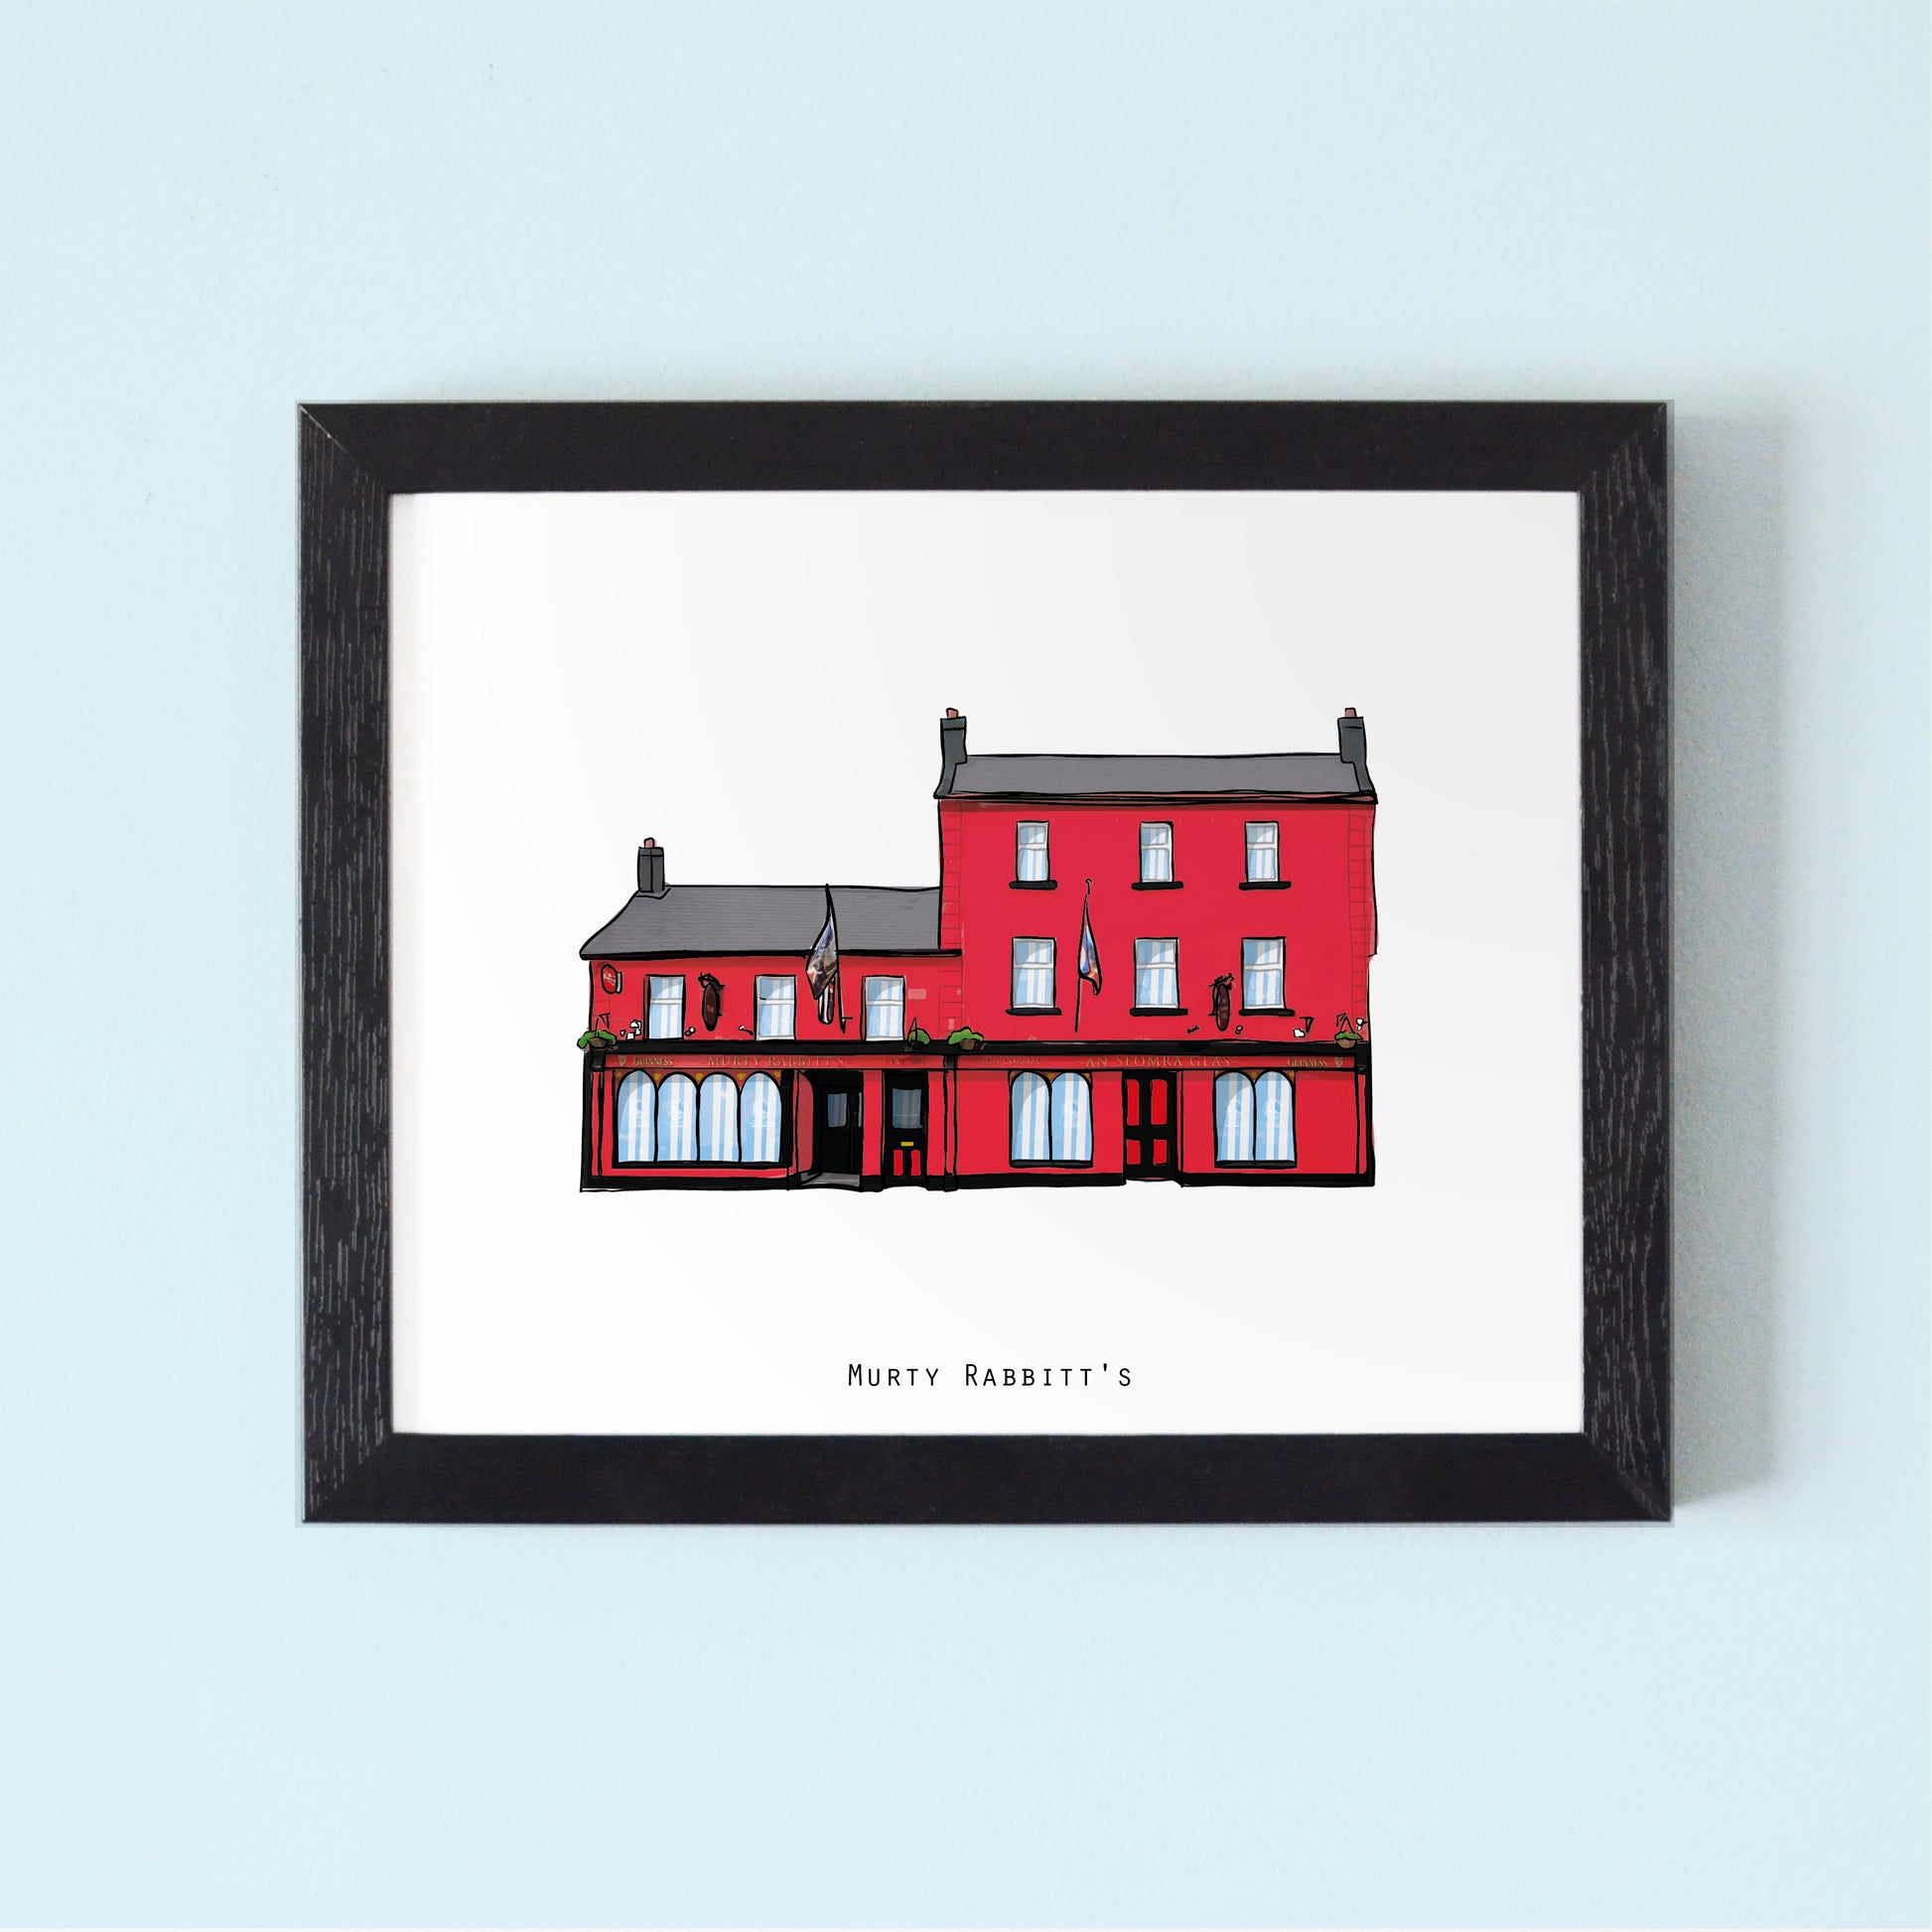 Murty Rabbitt's Illustrated Pubs of Galway